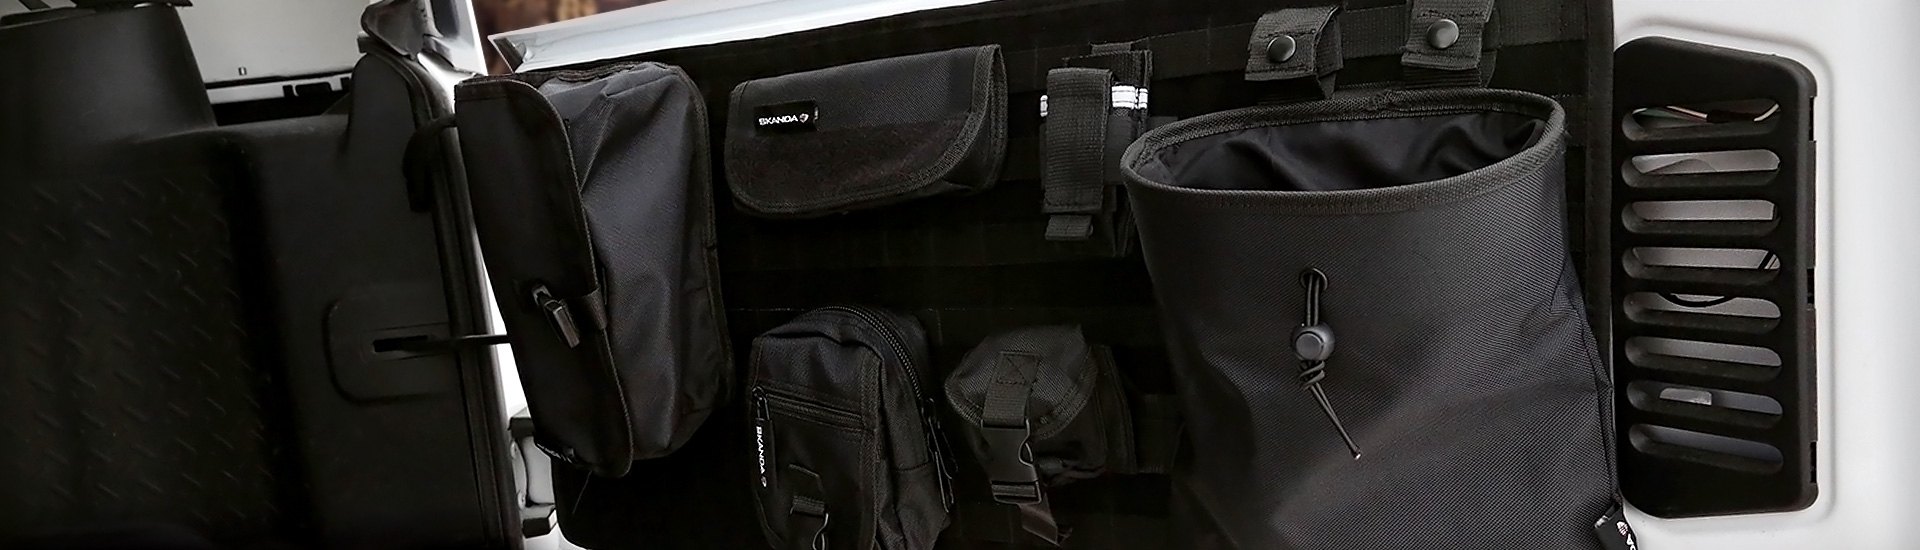 Keep Your Gear Organized With New Custom Tailored Jk Tailgate Tactical Storage By Coverking